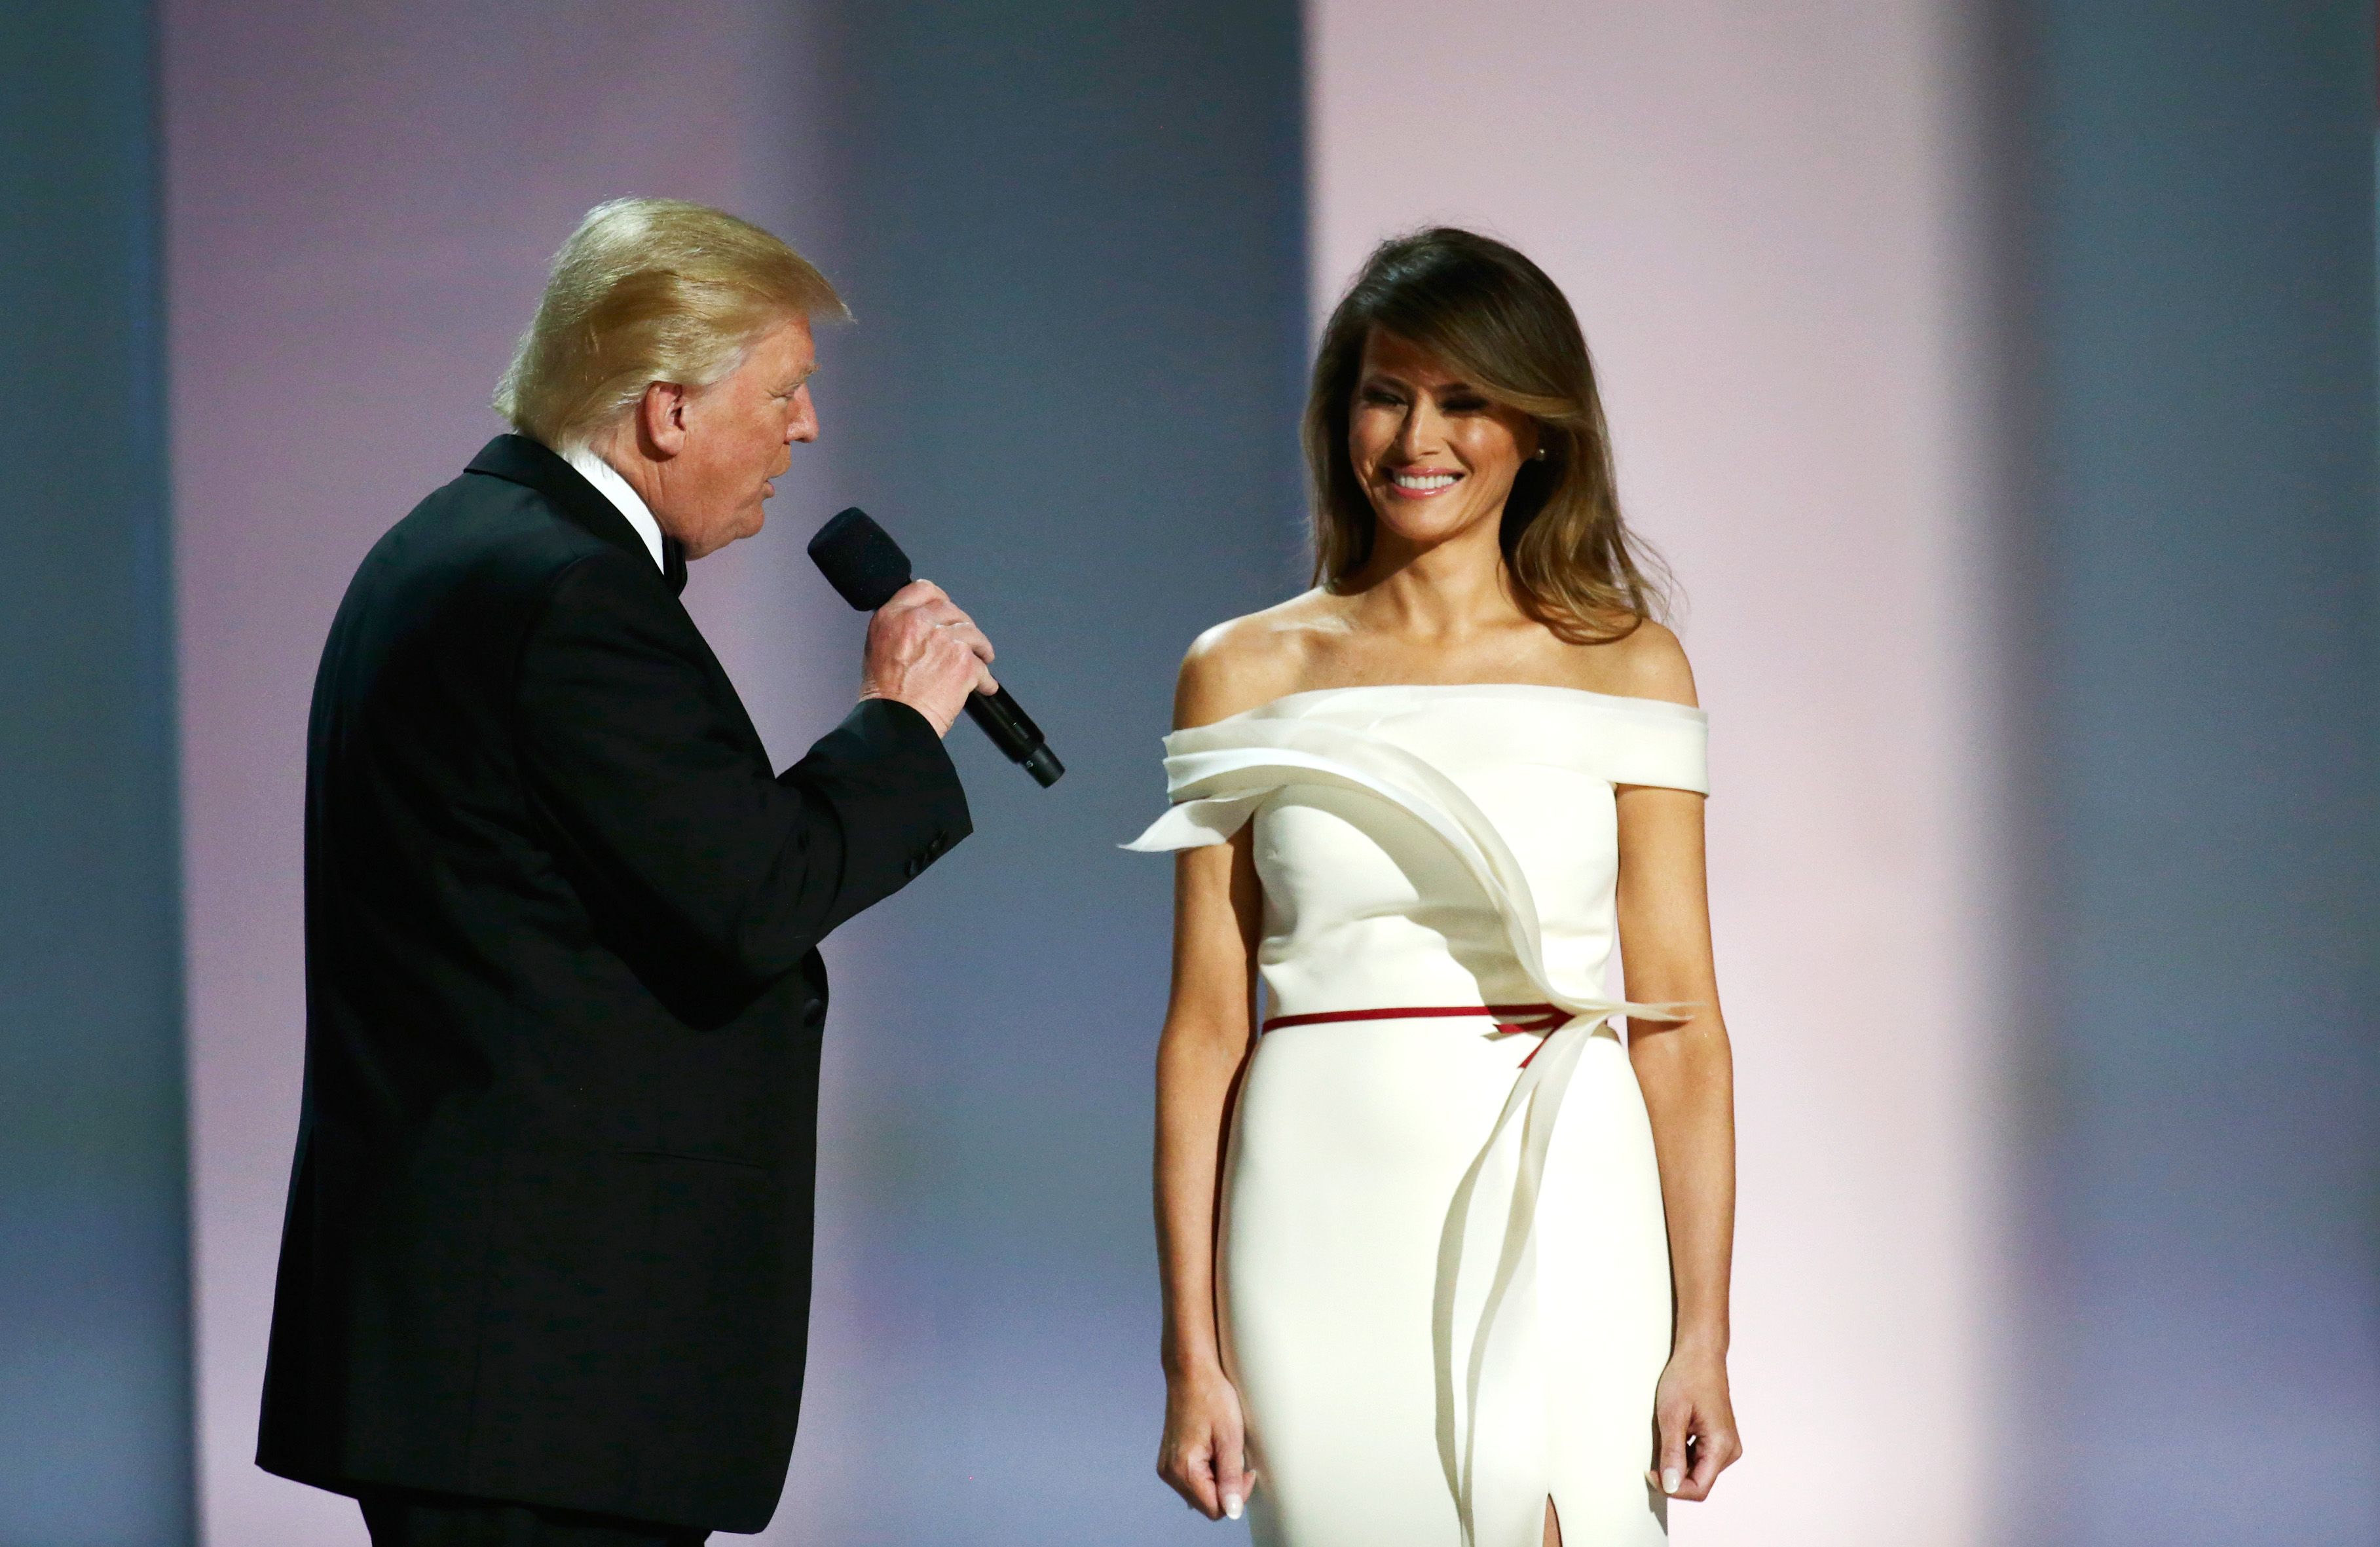 Melania Trump to donate inaugural ball gown to Smithsonian